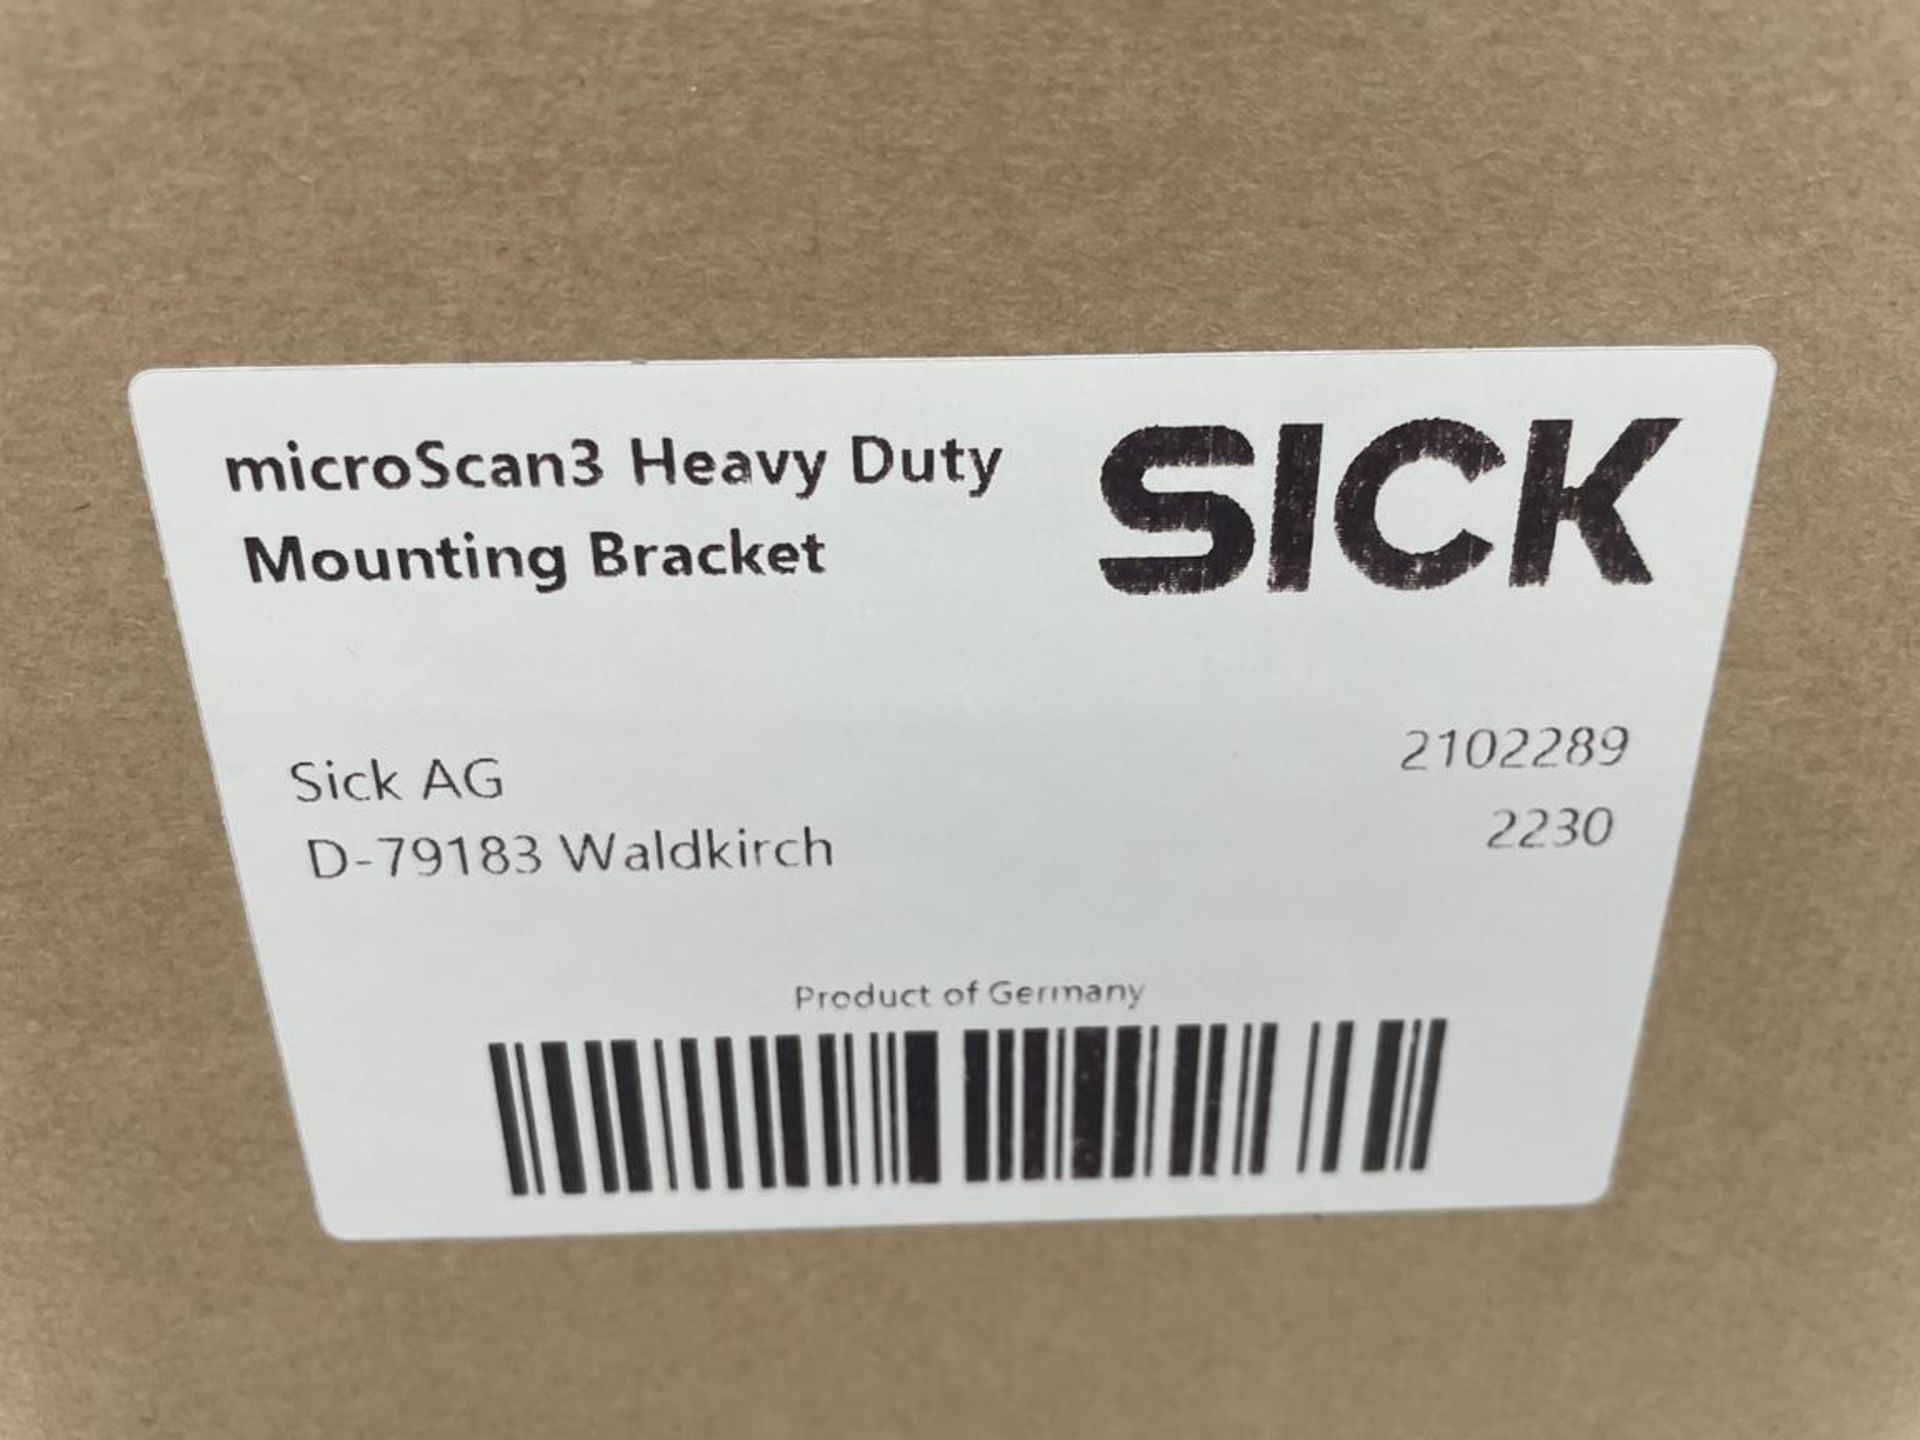 4x (no.) Sick, Microscan 3 heavy duty brackets (boxed and unused) - Image 2 of 2